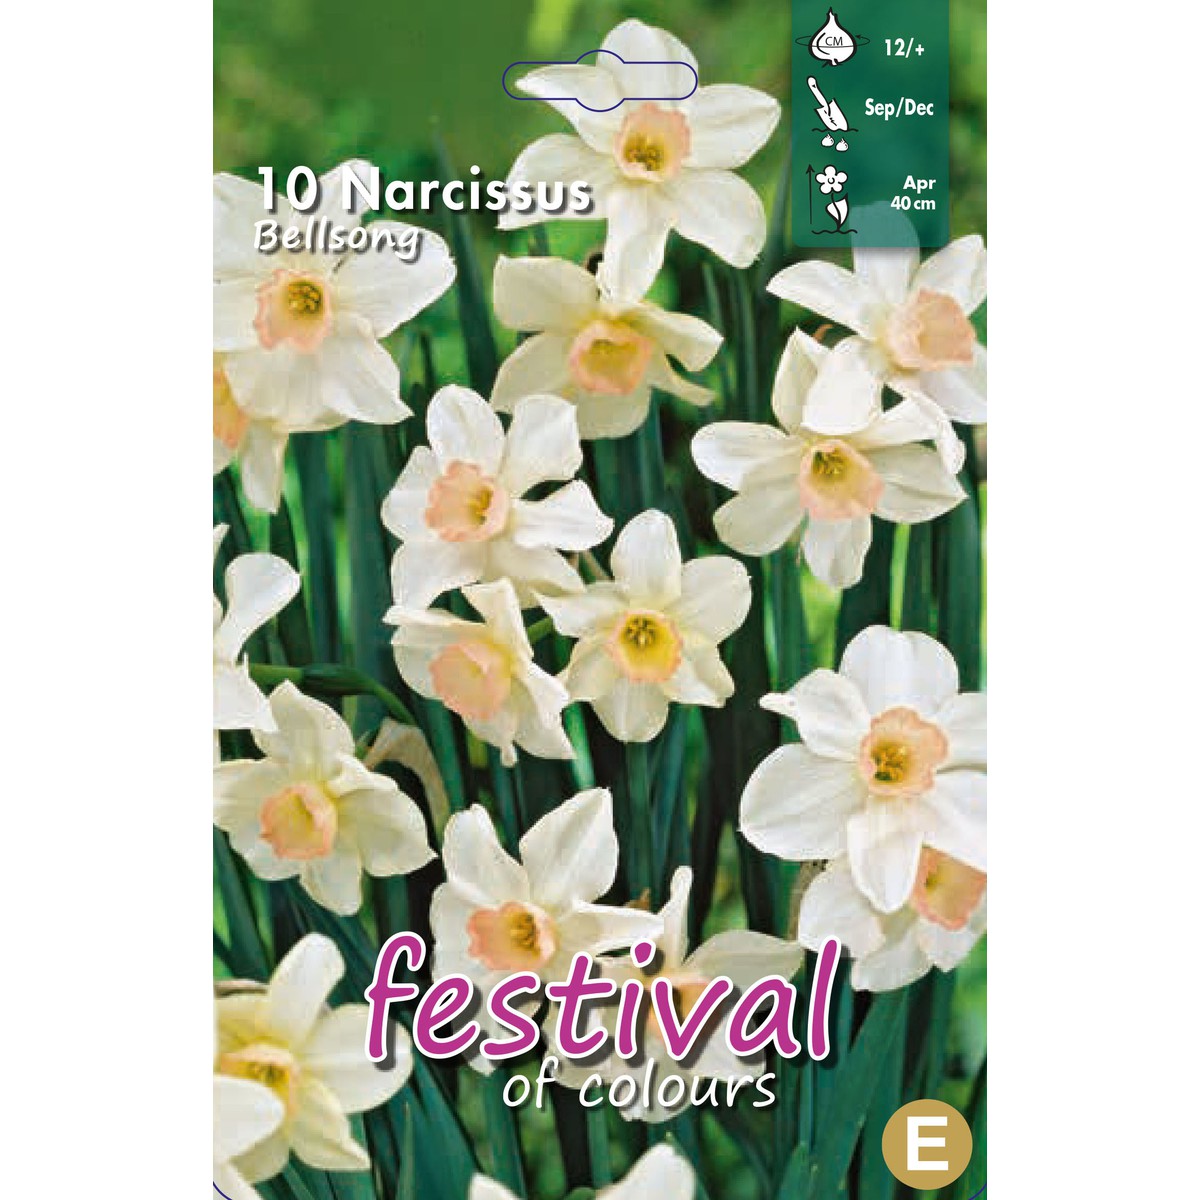   Narcissus 'Bell Song'  5 pcs 12/